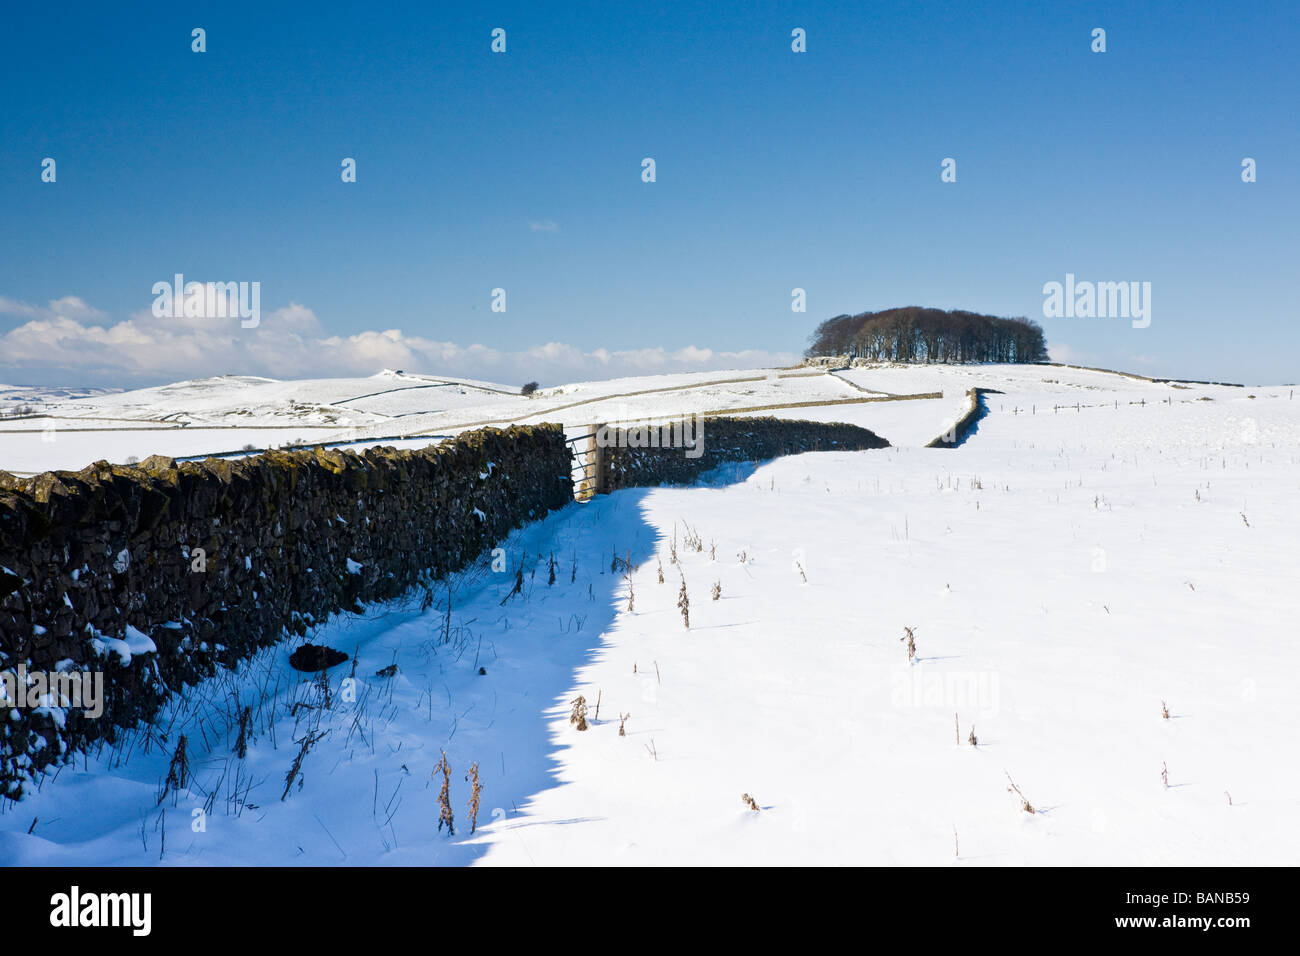 View across derbyshire countryside near Ashbourne in winter with snow on the ground Stock Photo